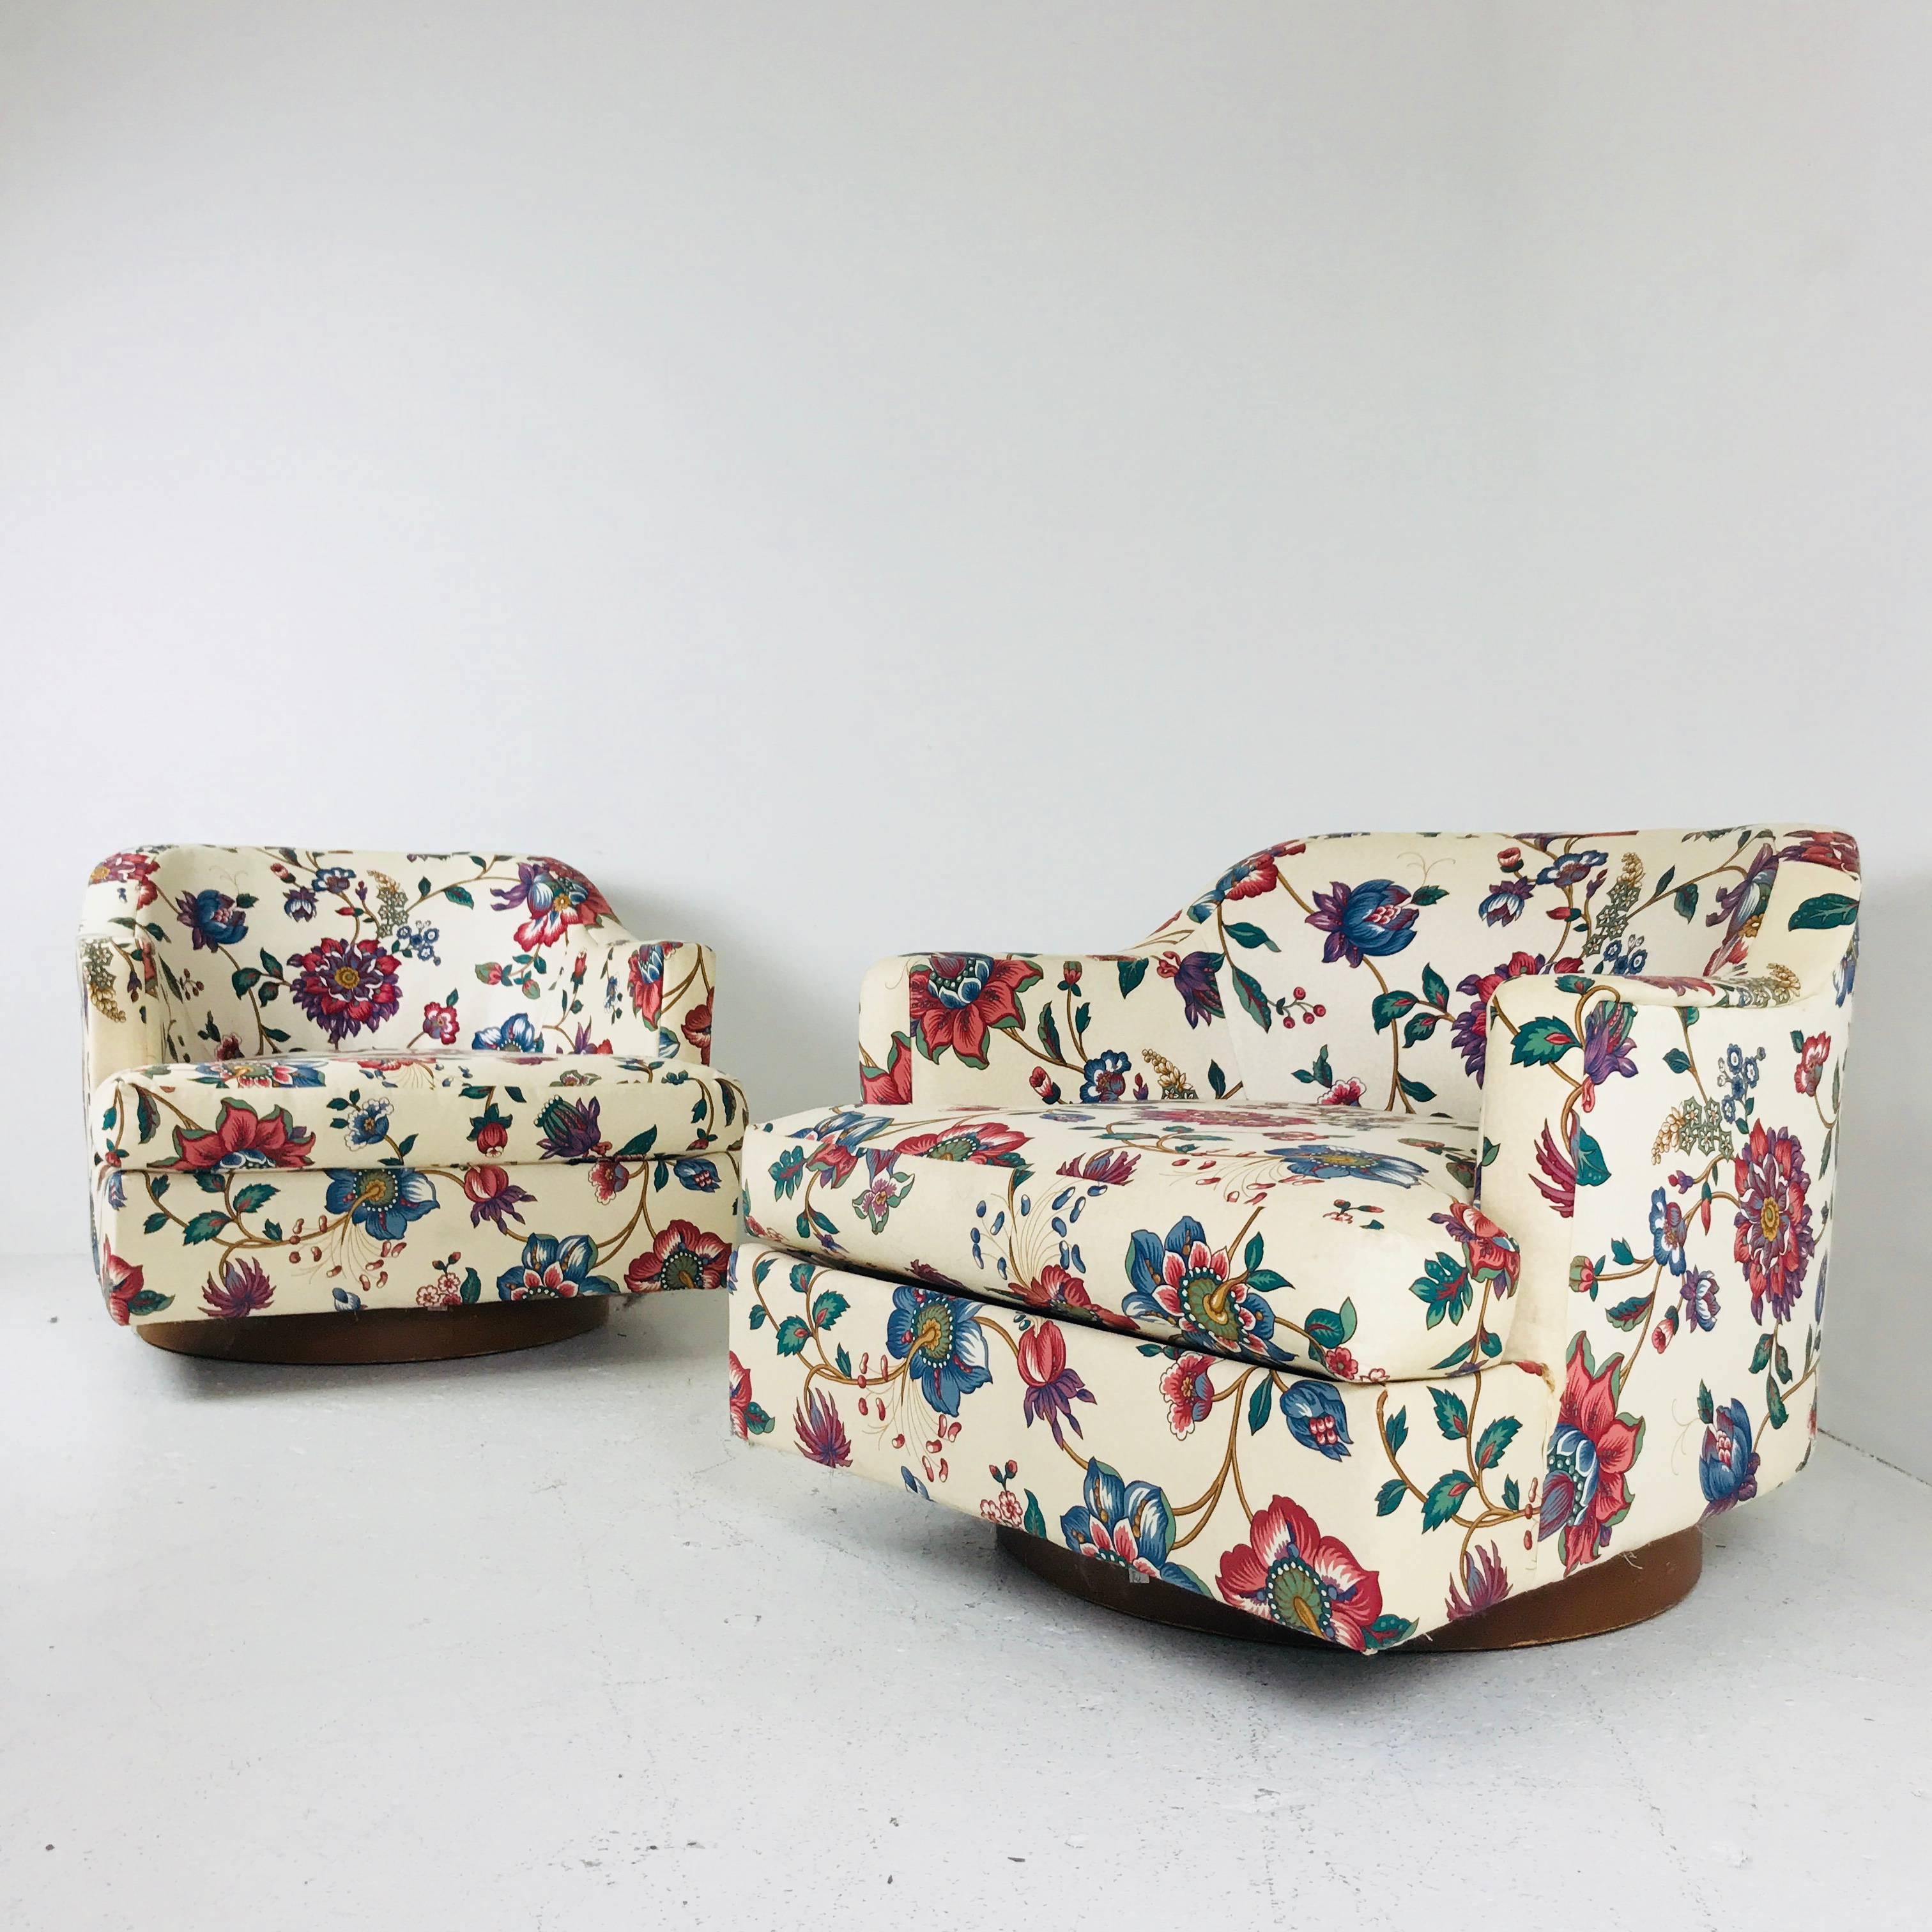 Pair of Floral Swivel Chairs in the Style of Milo Baughman and Harvey Probber. Chairs are in good vintage condition and new upholstery is recommended.

dimensions: 31.5